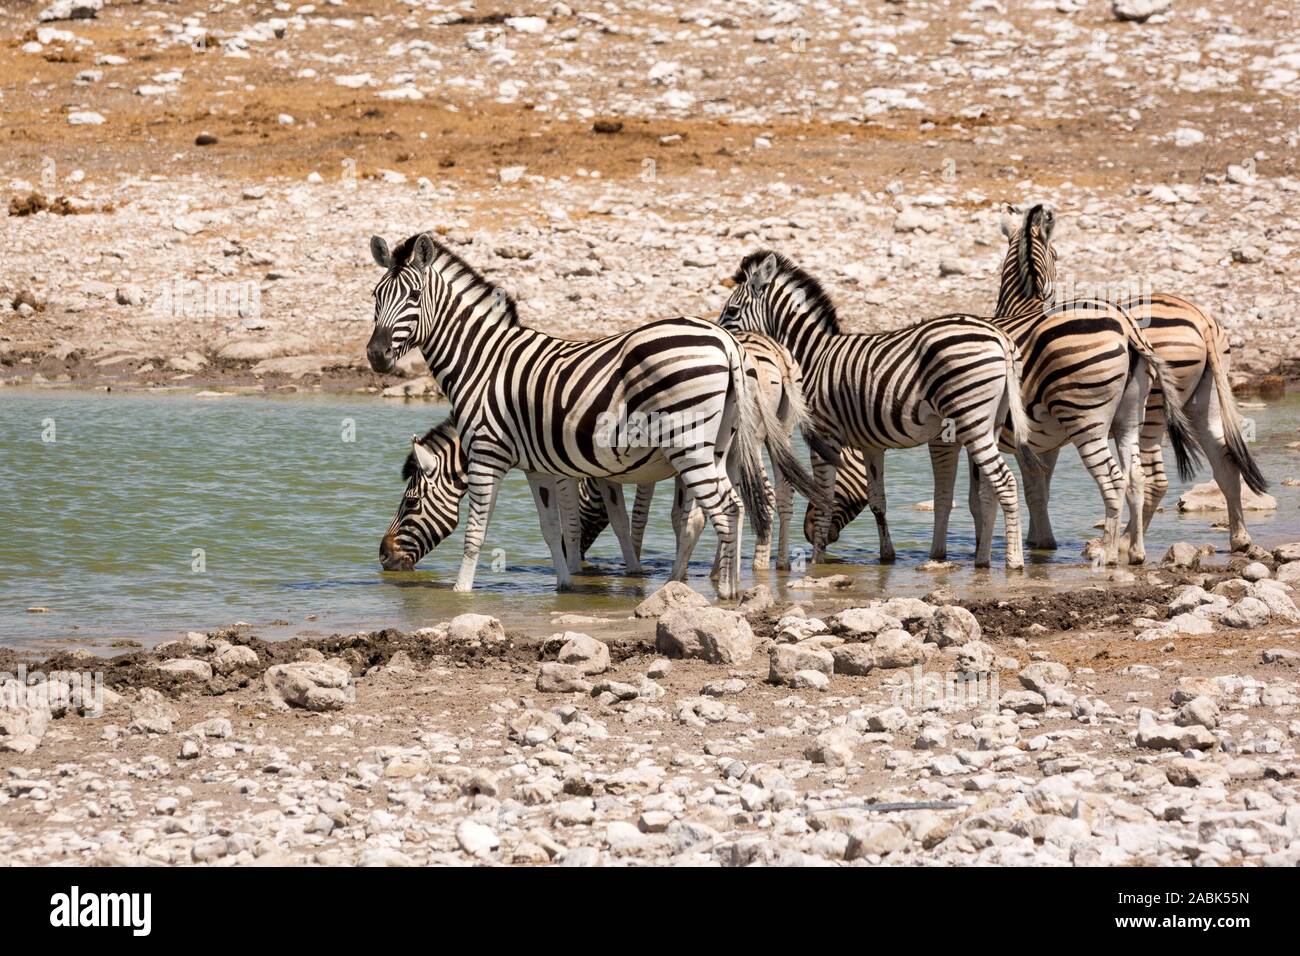 A group of zebras standing at a waterhole, Etosha, Namibia, Africa Stock Photo